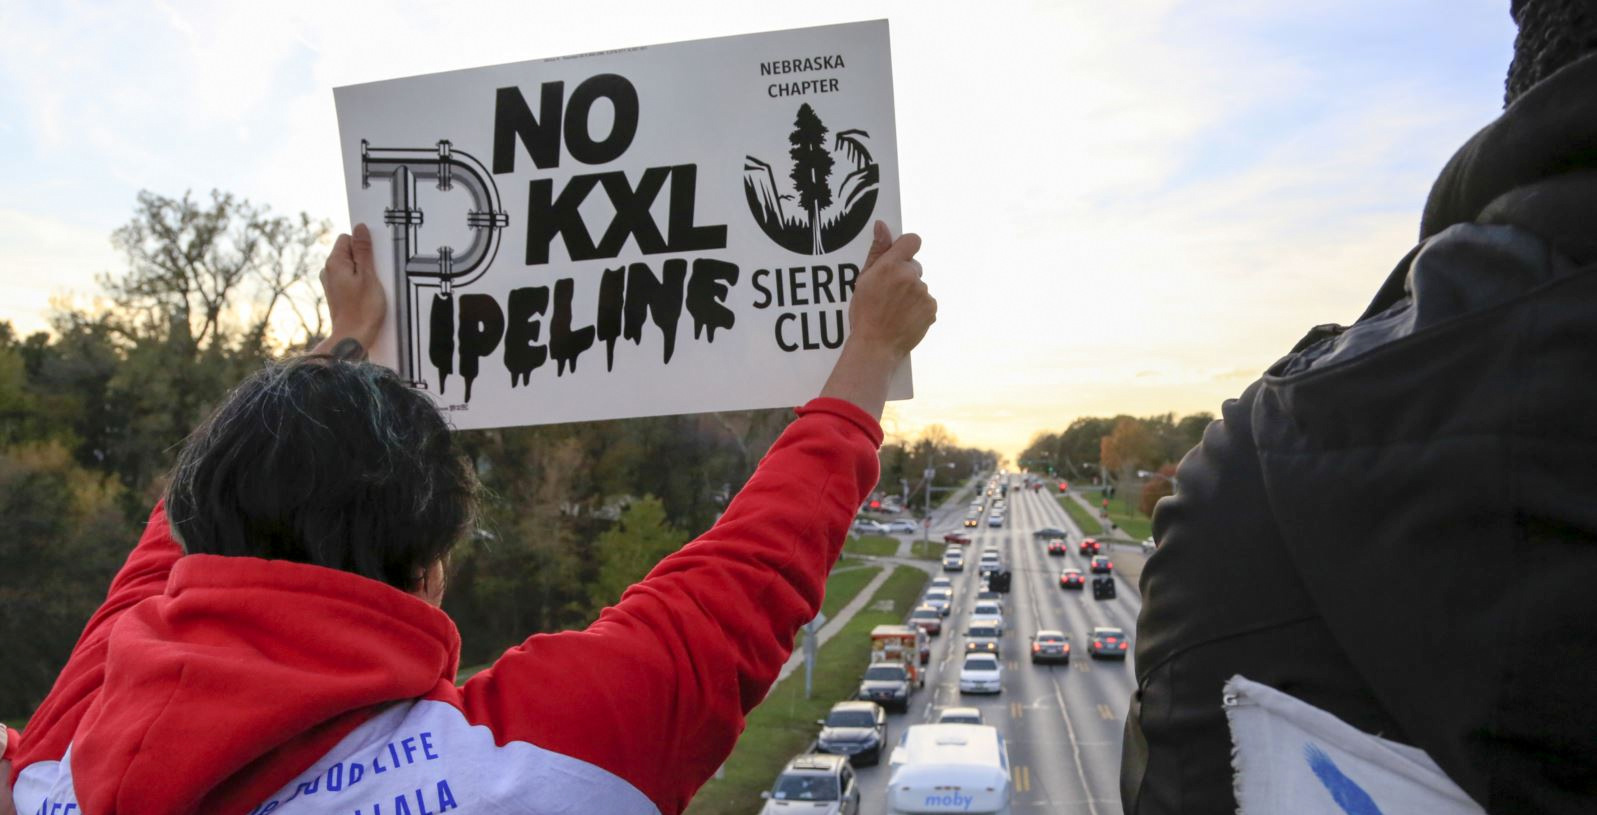 Opponents of the Keystone XL pipeline demonstrate on the Dodge Street pedestrian bridge during rush hour in Omaha, Neb., Wednesday, Nov. 1, 2017. The Nebraska Public Service Commission has until Nov. 23 to decide whether to approve or reject a proposed state route for the Keystone XL pipeline. (AP Photo/Nati Harnik)